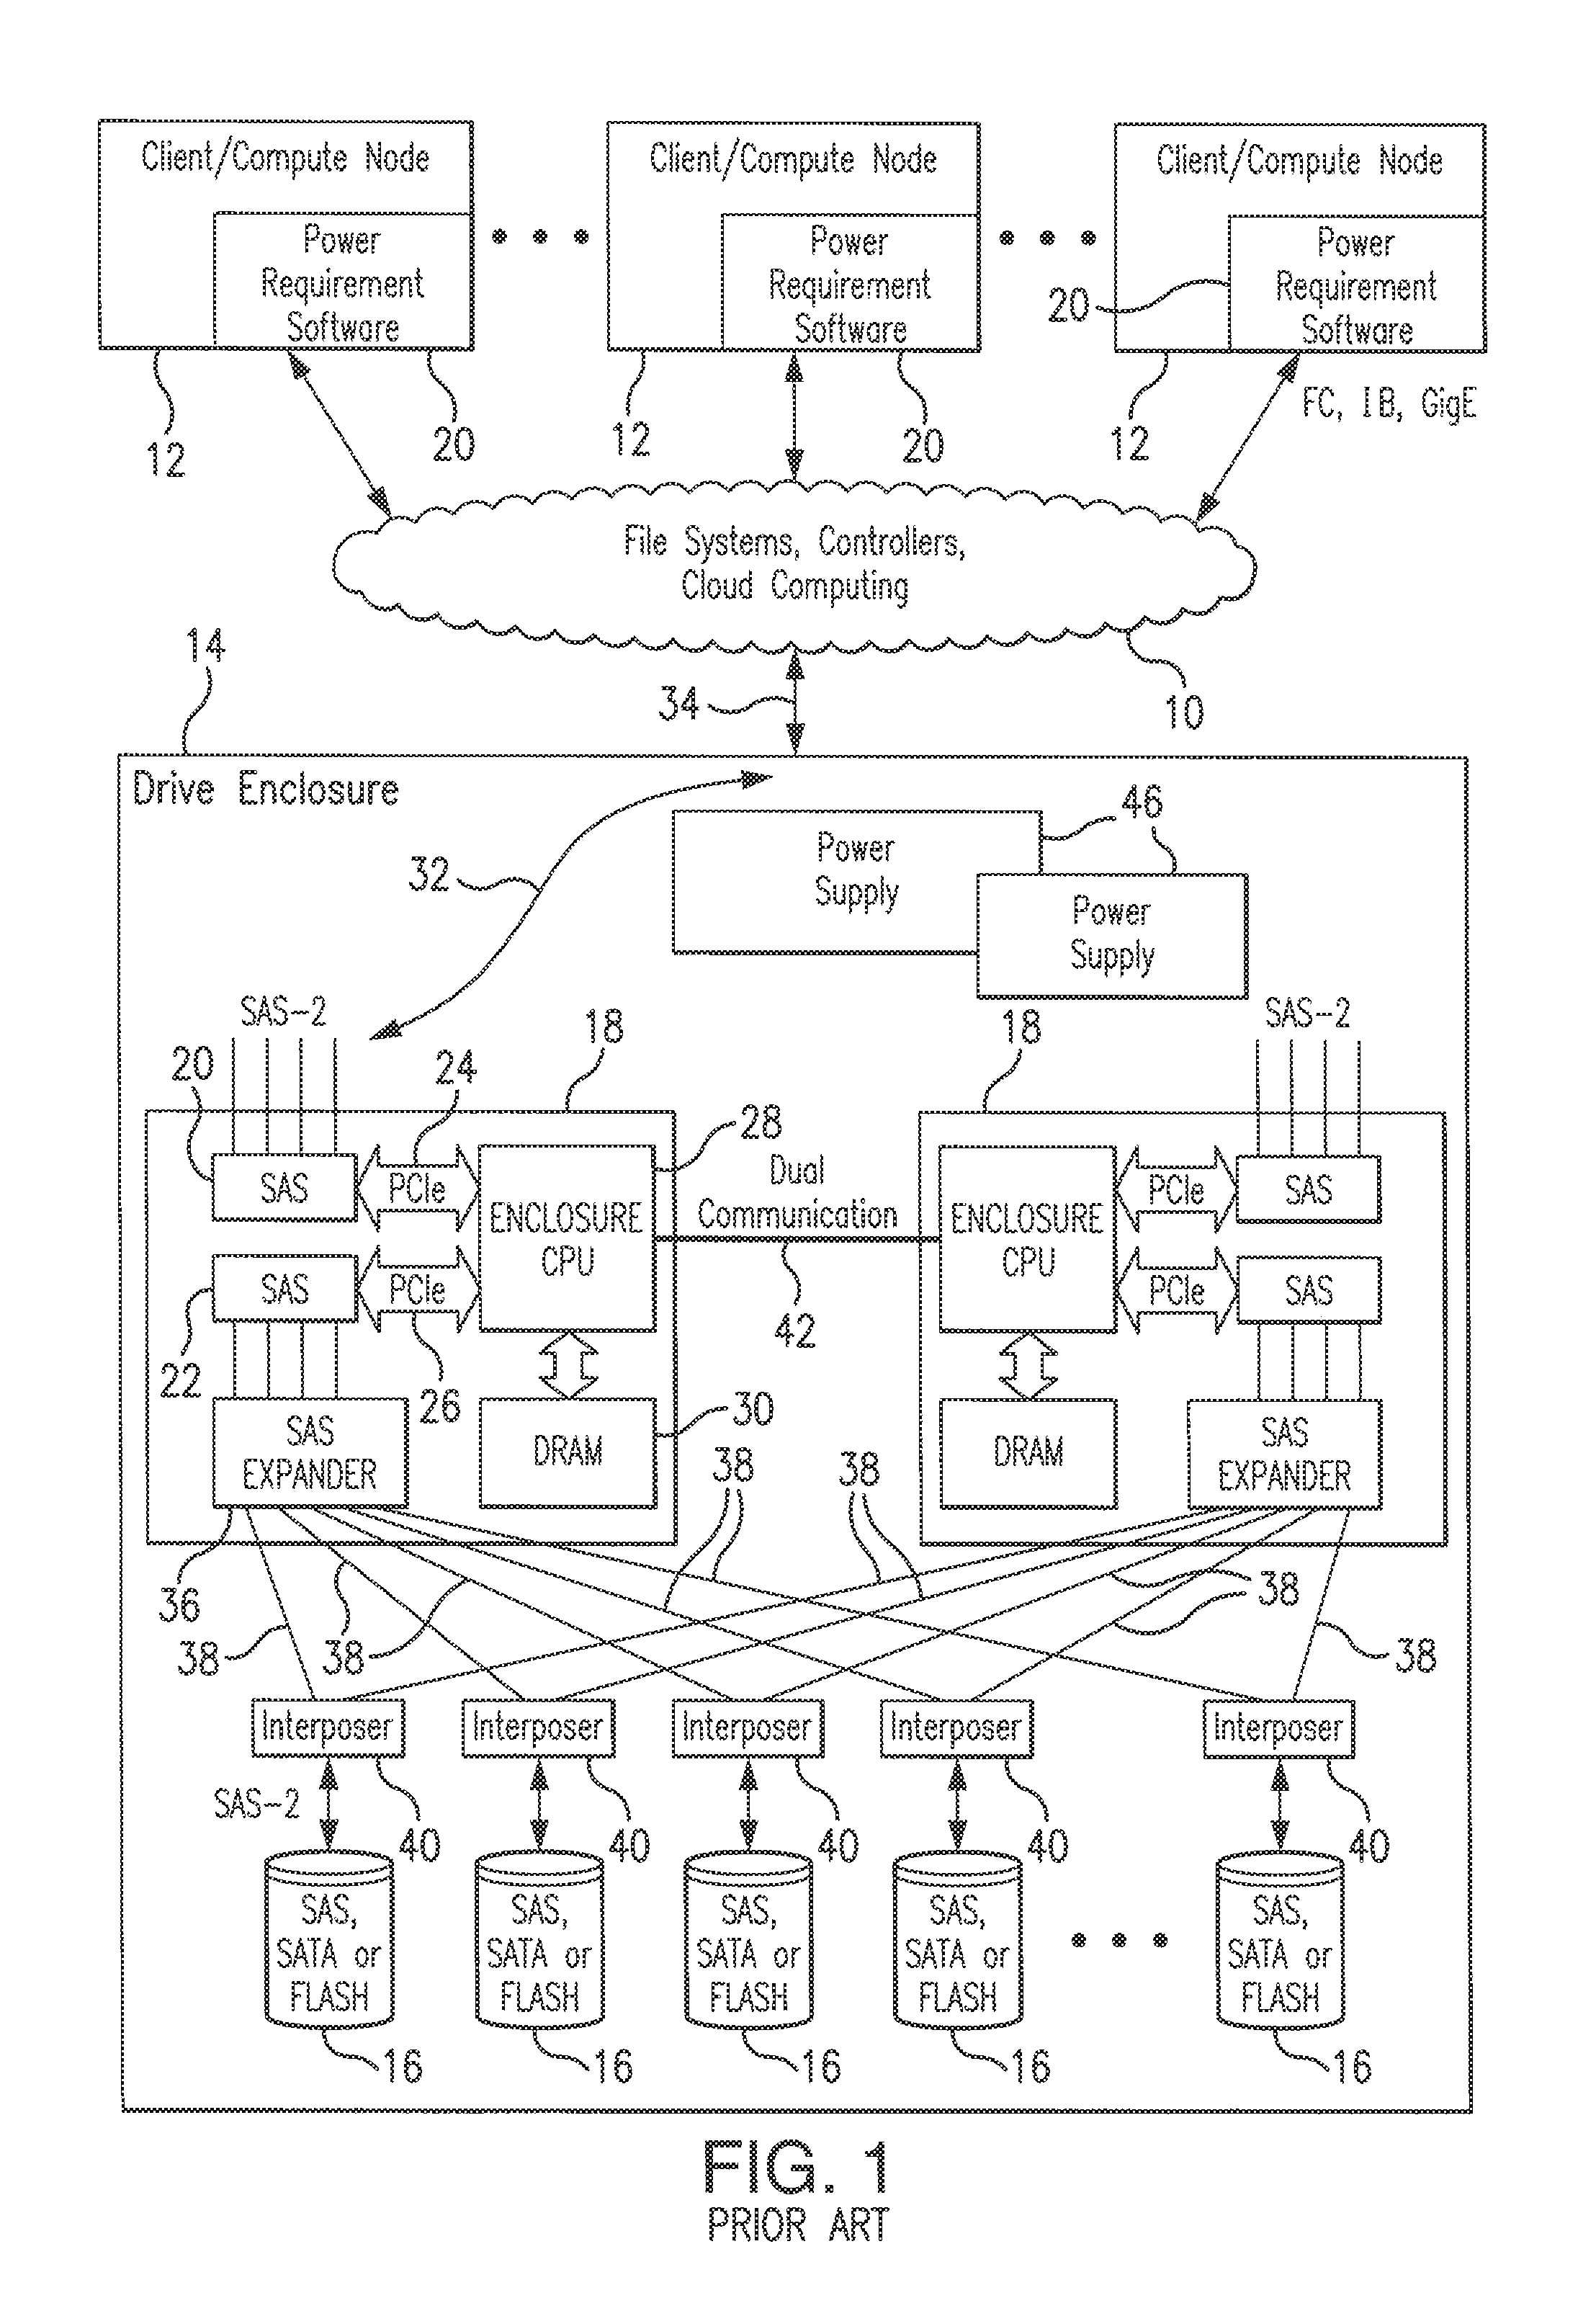 Data storage system and method for monitoring and controlling the power budget in a drive enclosure housing data storage devices